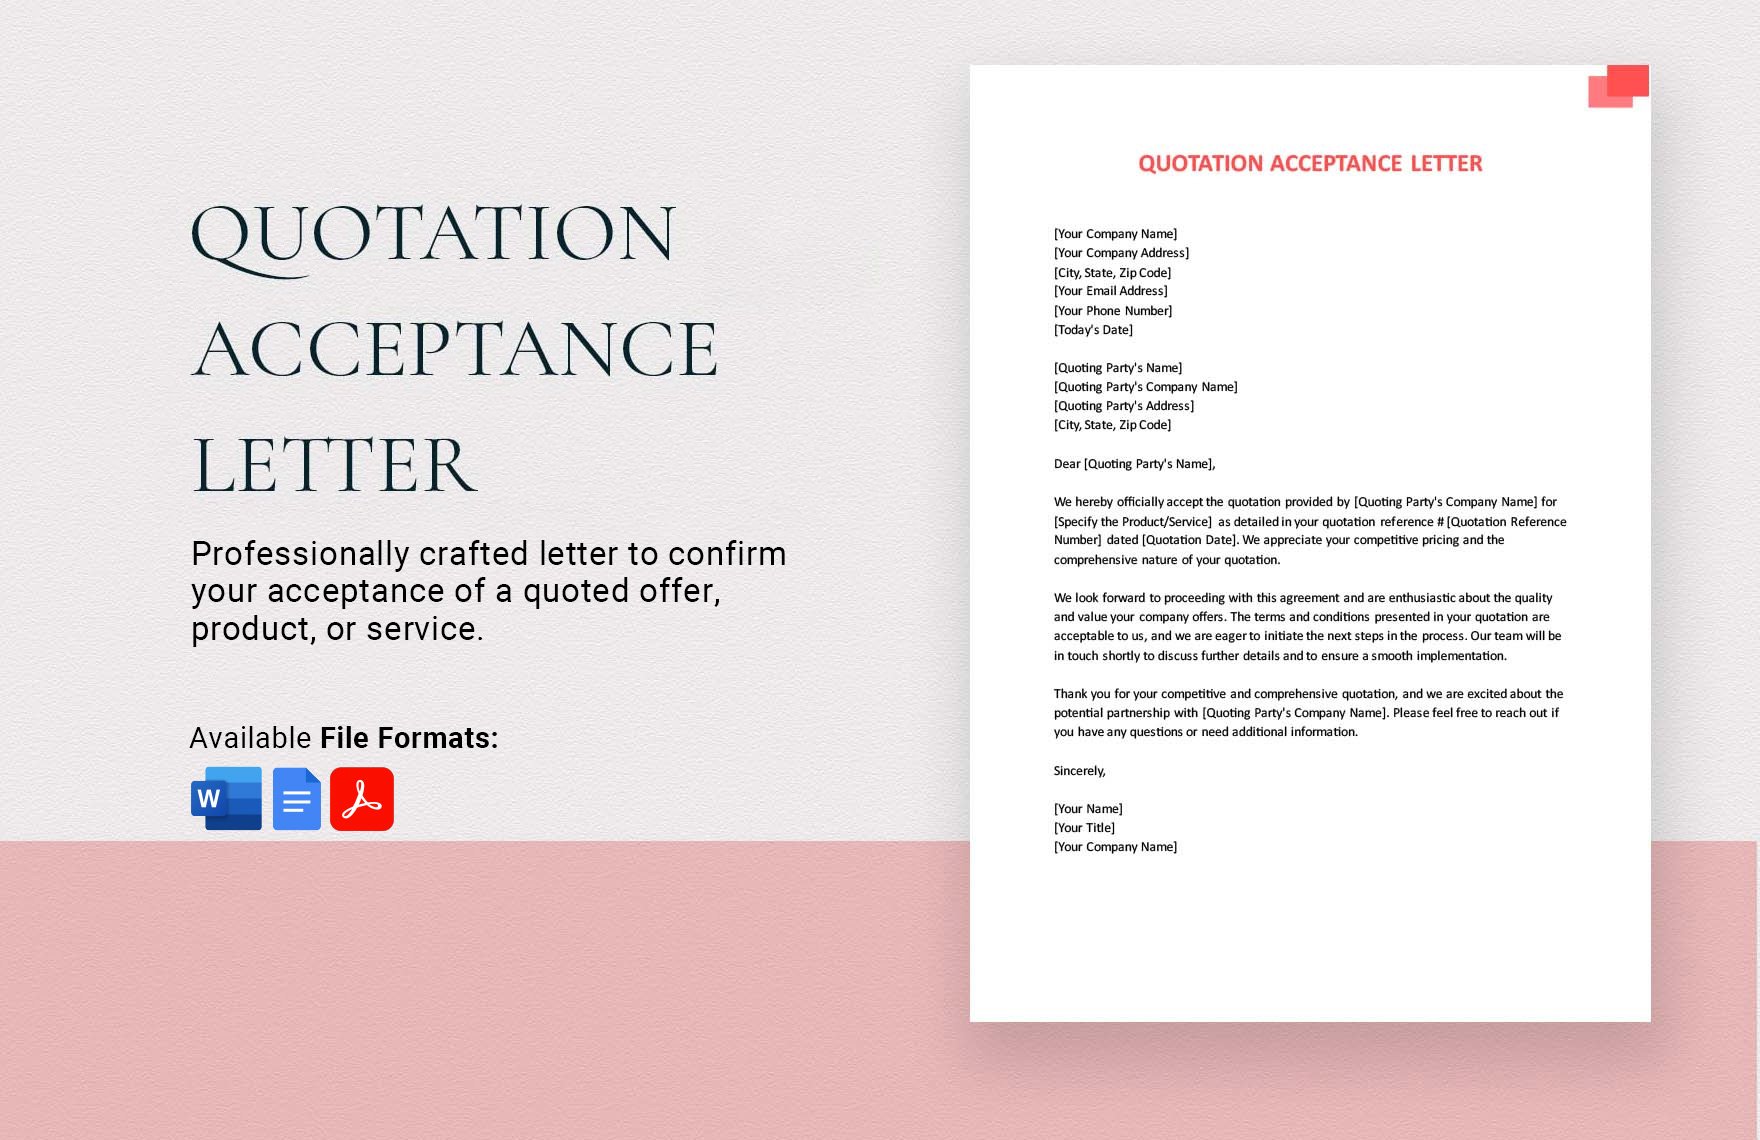 Quotation Acceptance Letter in Word, Google Docs, PDF